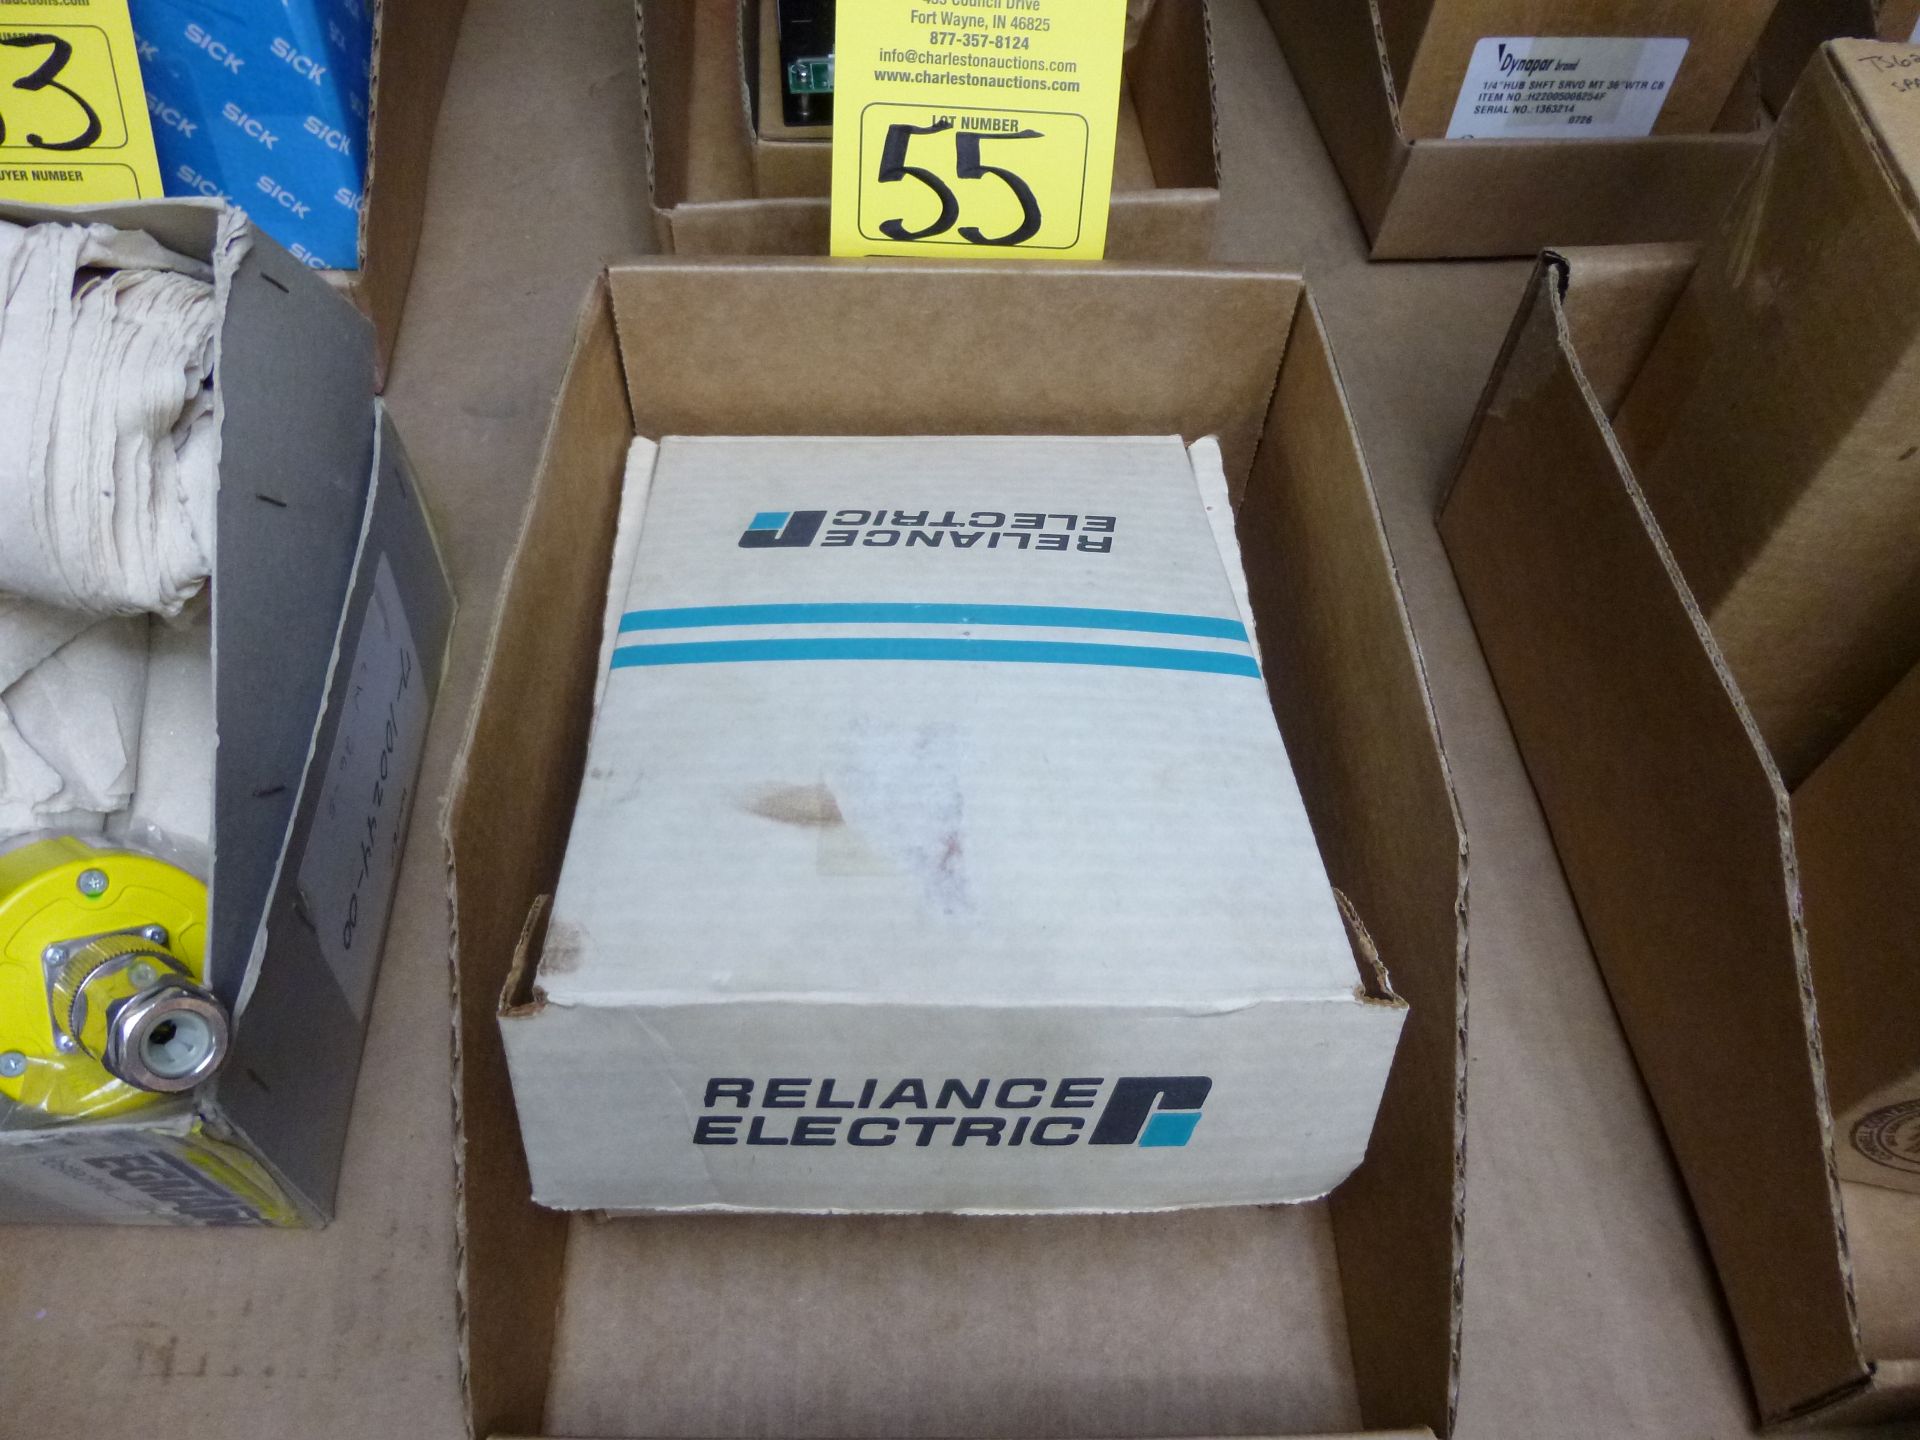 Reliance Electric 0-55326-9 Voltage Isolation PC Board (new in box) Shipping can be prepared for